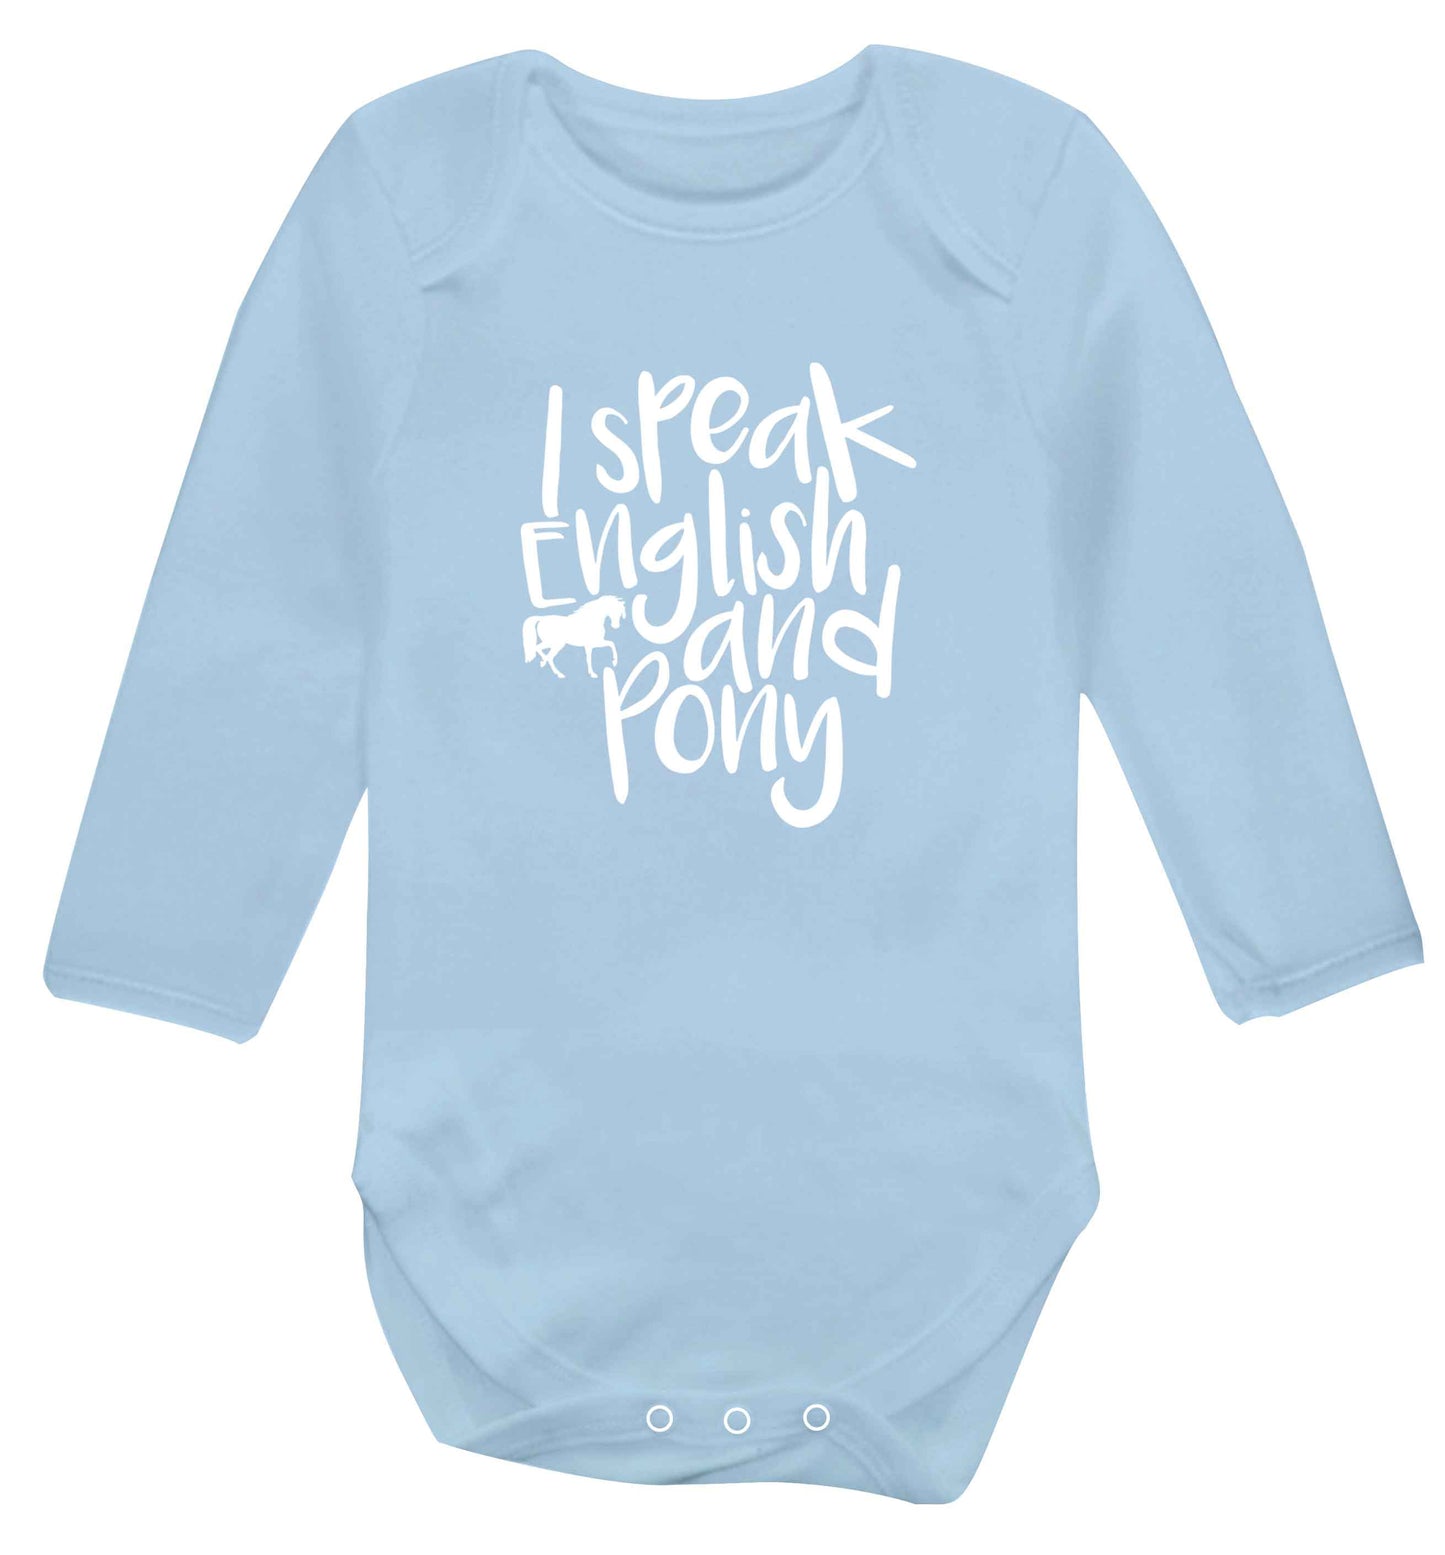 I speak English and pony baby vest long sleeved pale blue 6-12 months